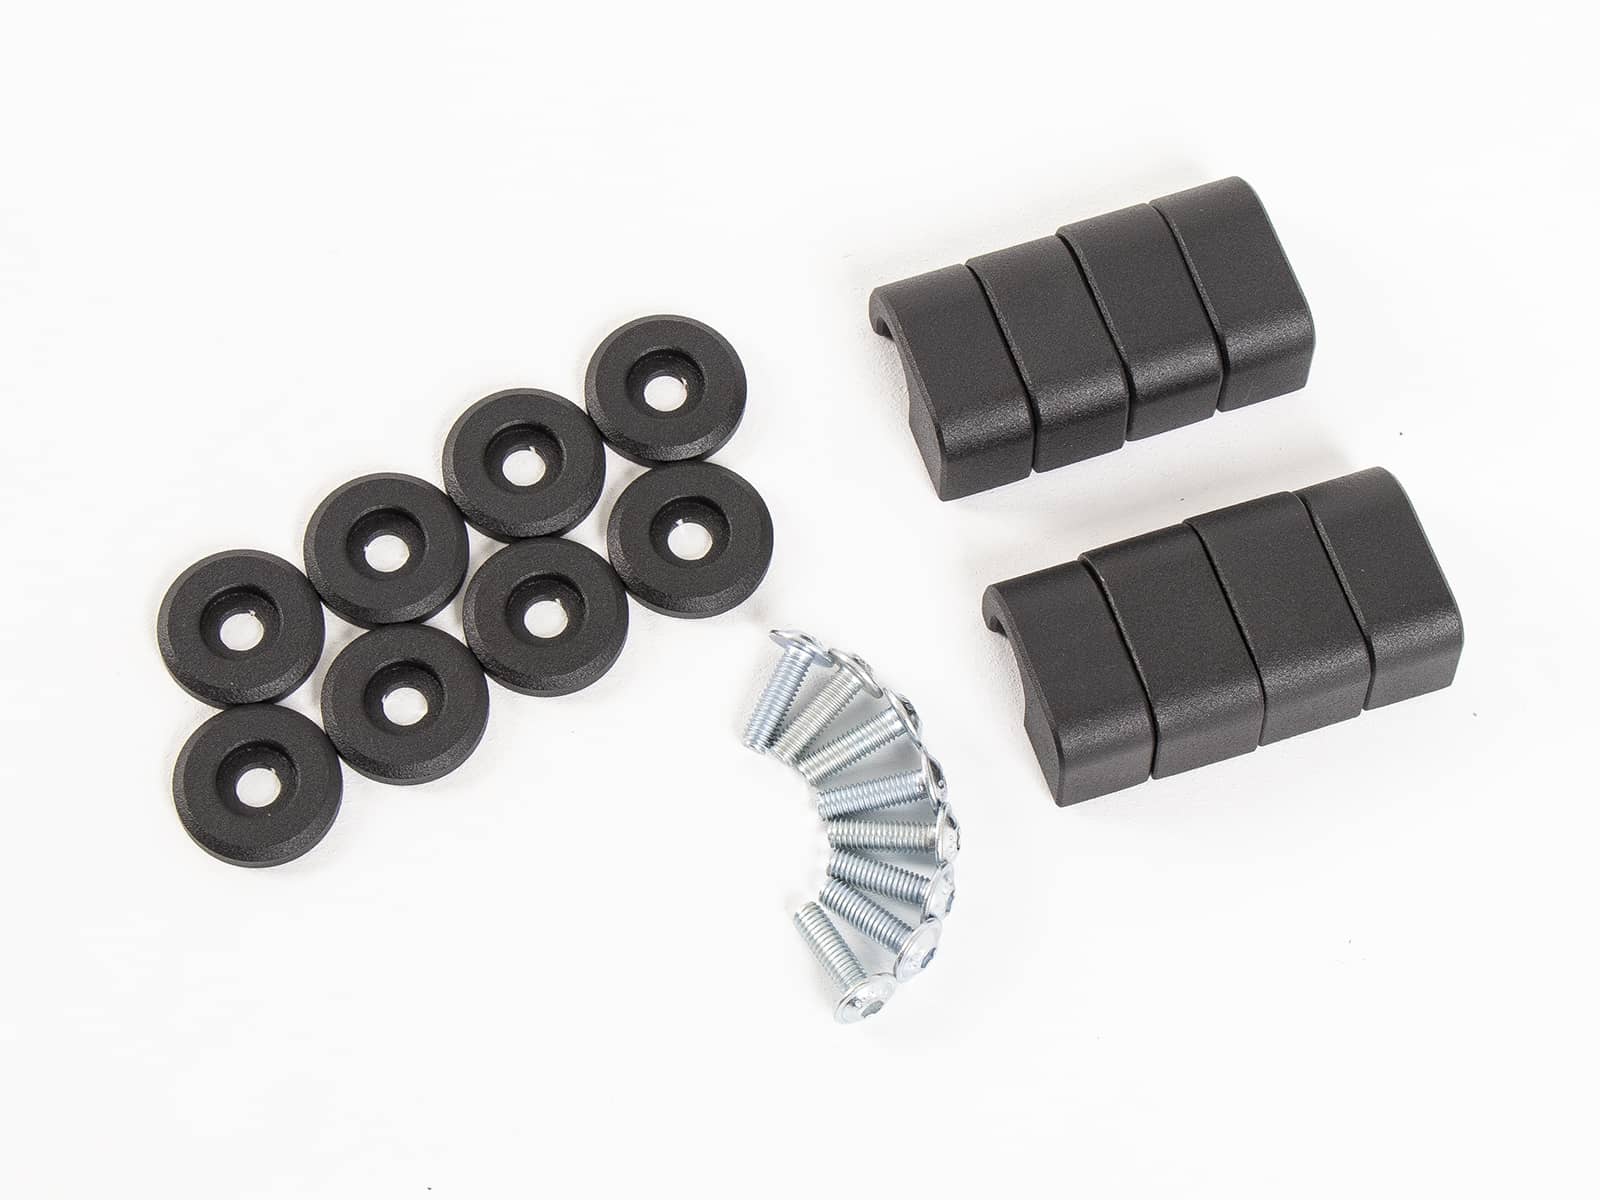 Mounting kit for Xtravel Basic universal holding plates to H&B tube sidecase carrier